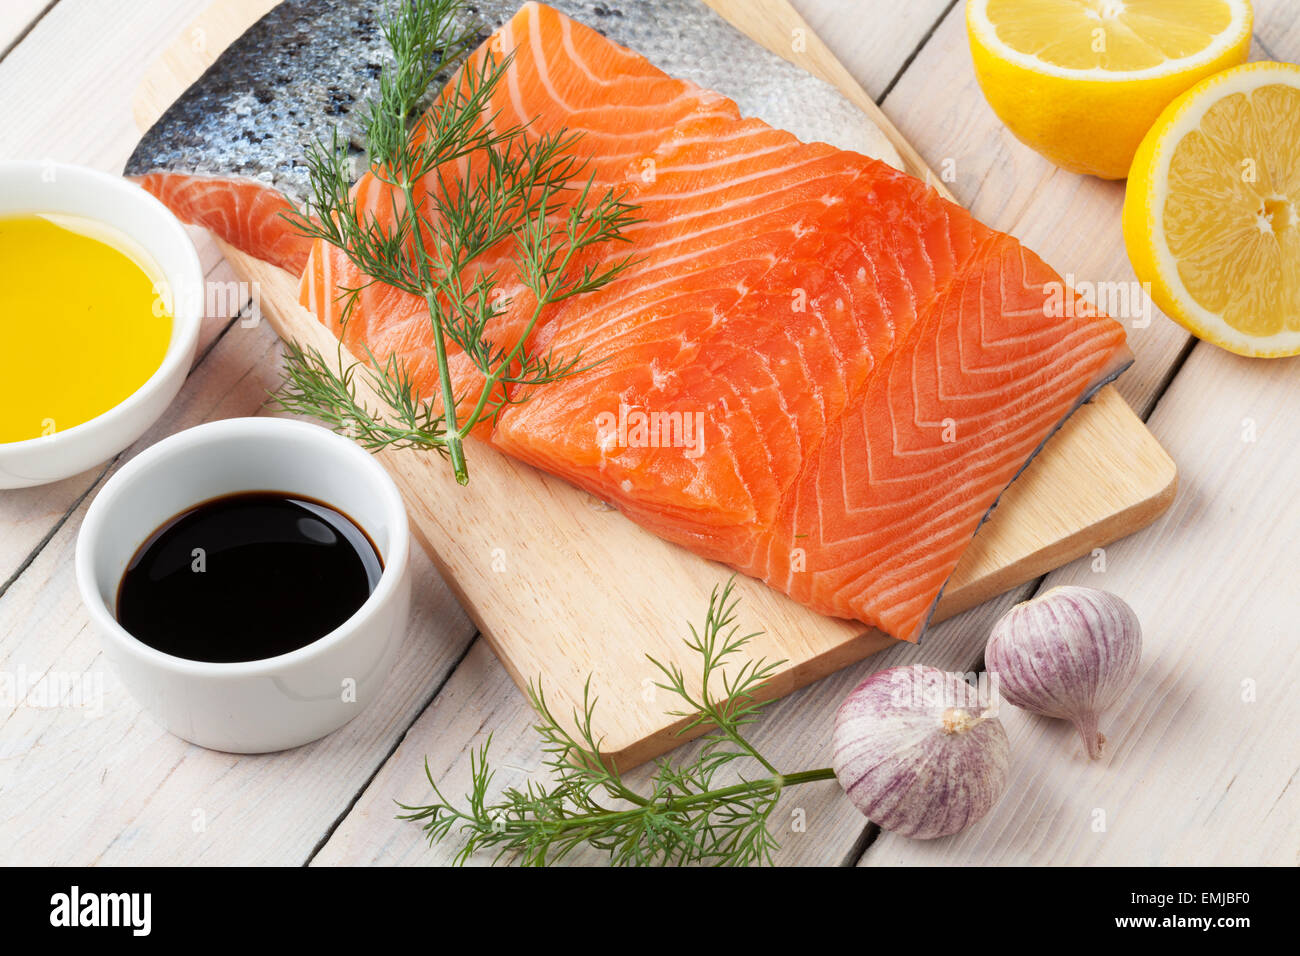 Salmon, spices and condiments on wooden table Stock Photo